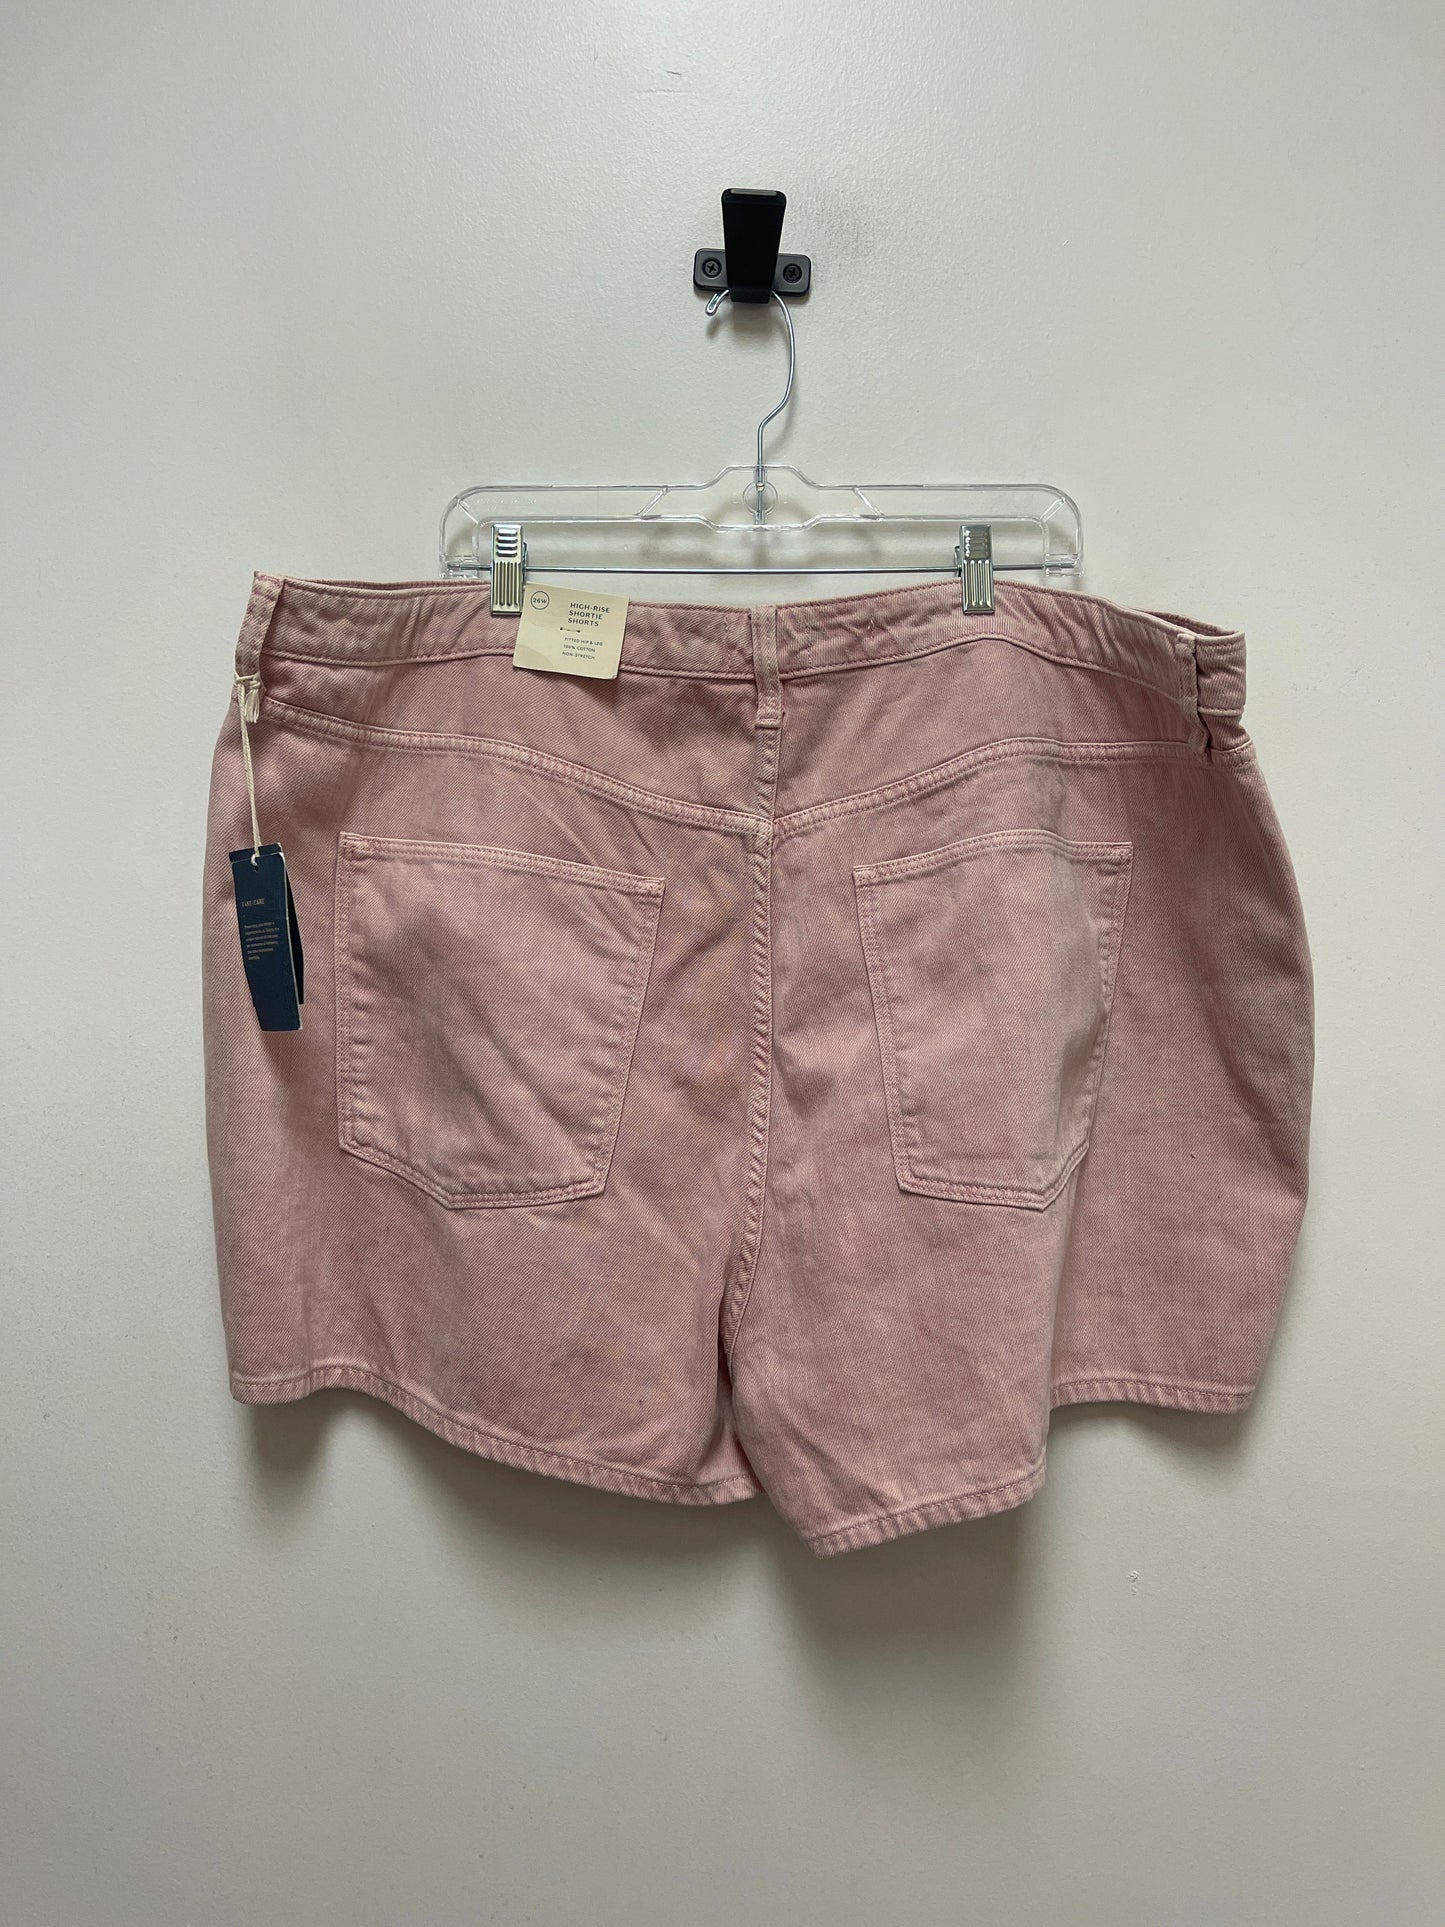 Shorts By Universal Thread  Size: 26